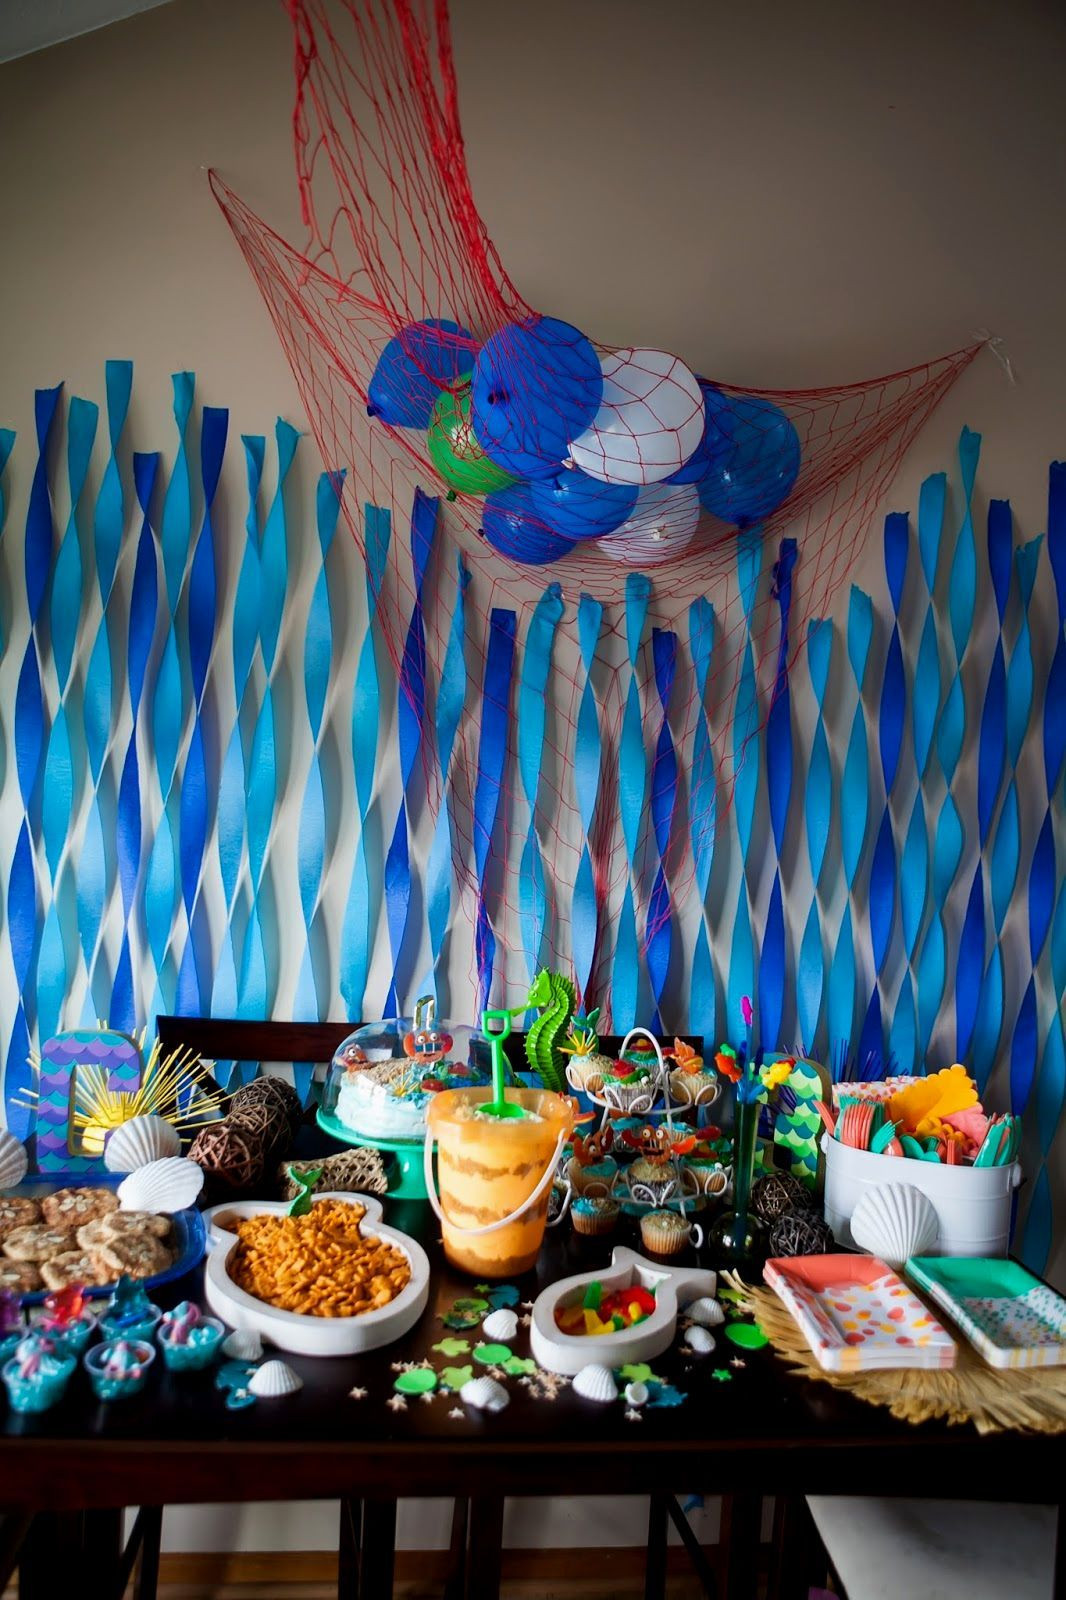 Beach Birthday Party Ideas Pinterest
 Pin by Aero FIT4U on Beach Party decorations in 2018